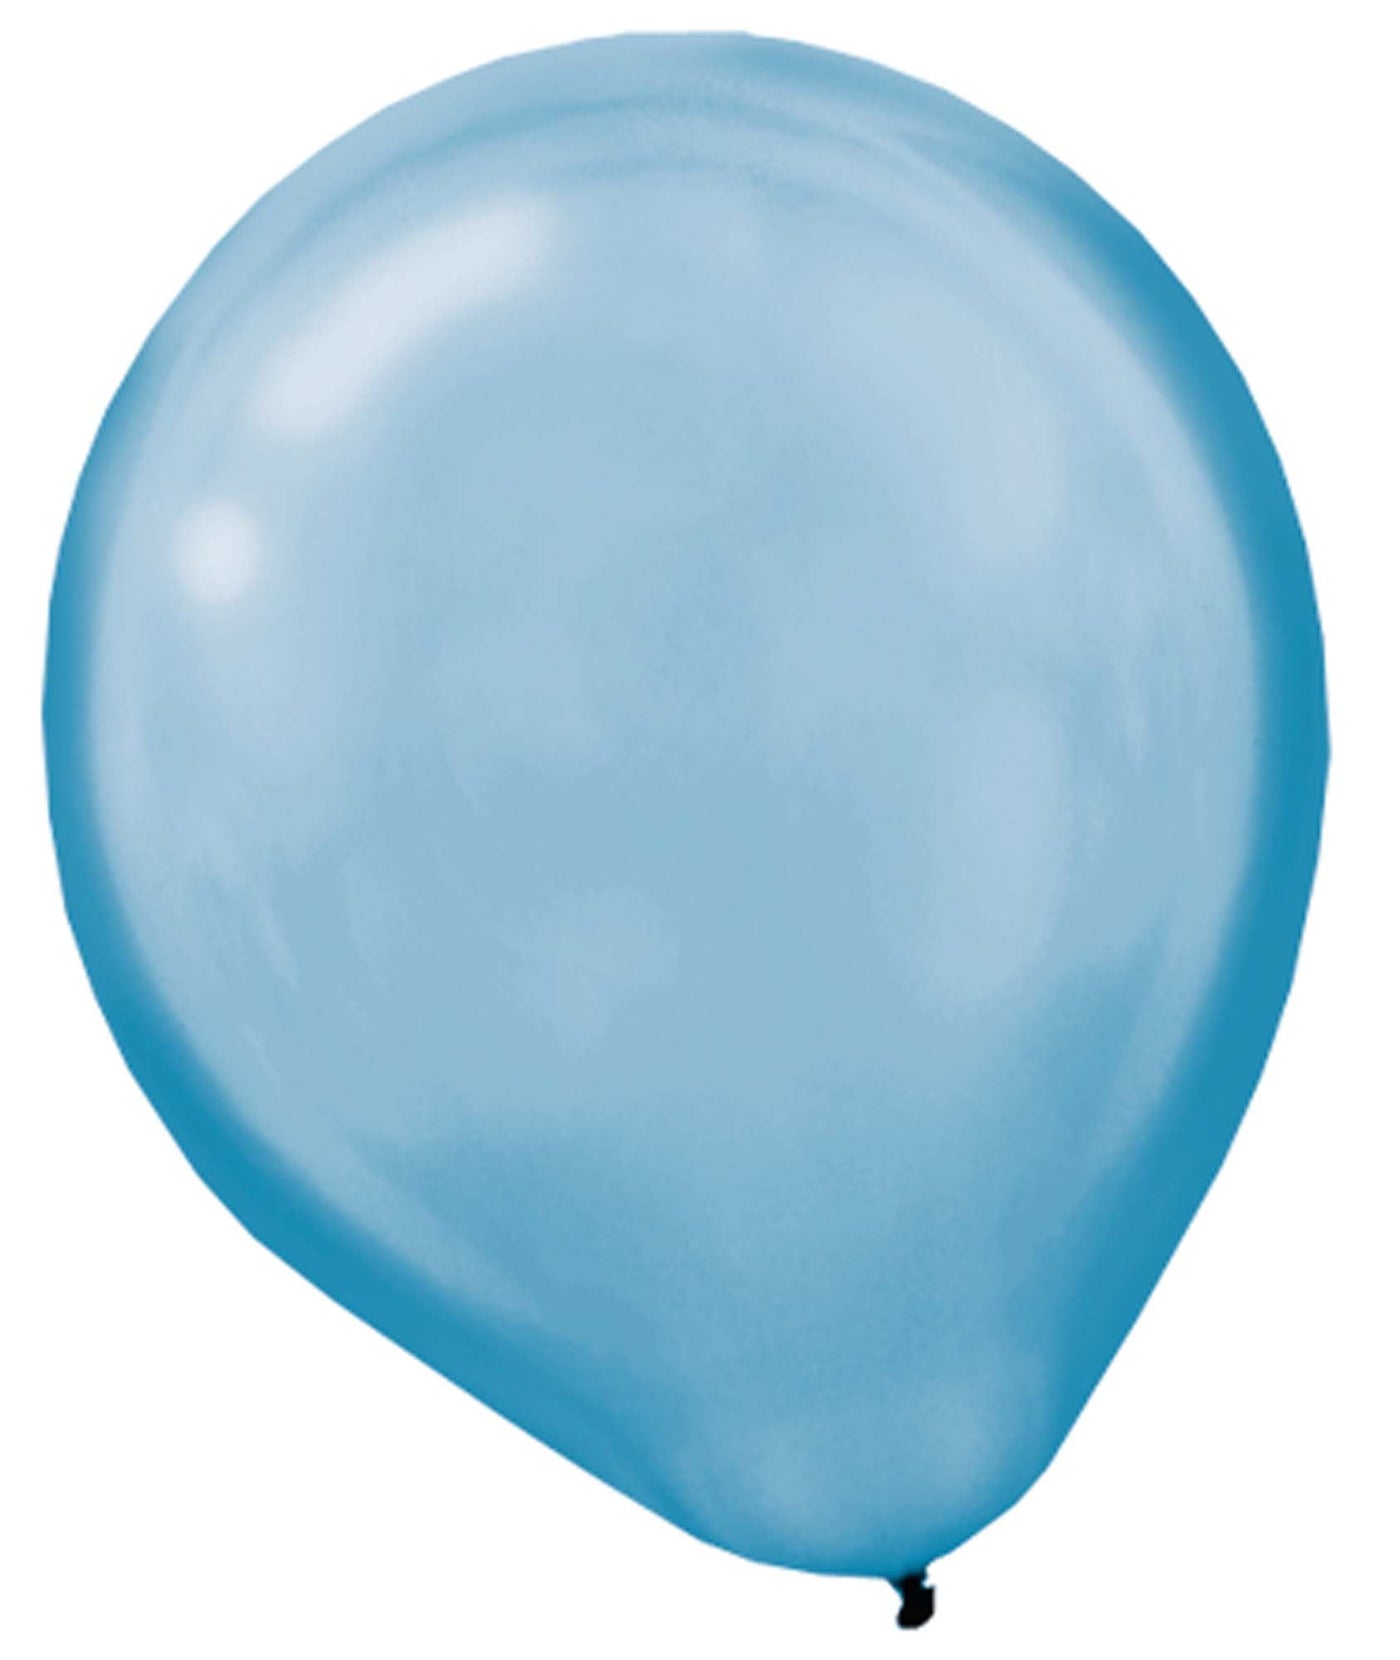 Powder Blue Pearlized Latex Balloons 100ct - JJ's Party House